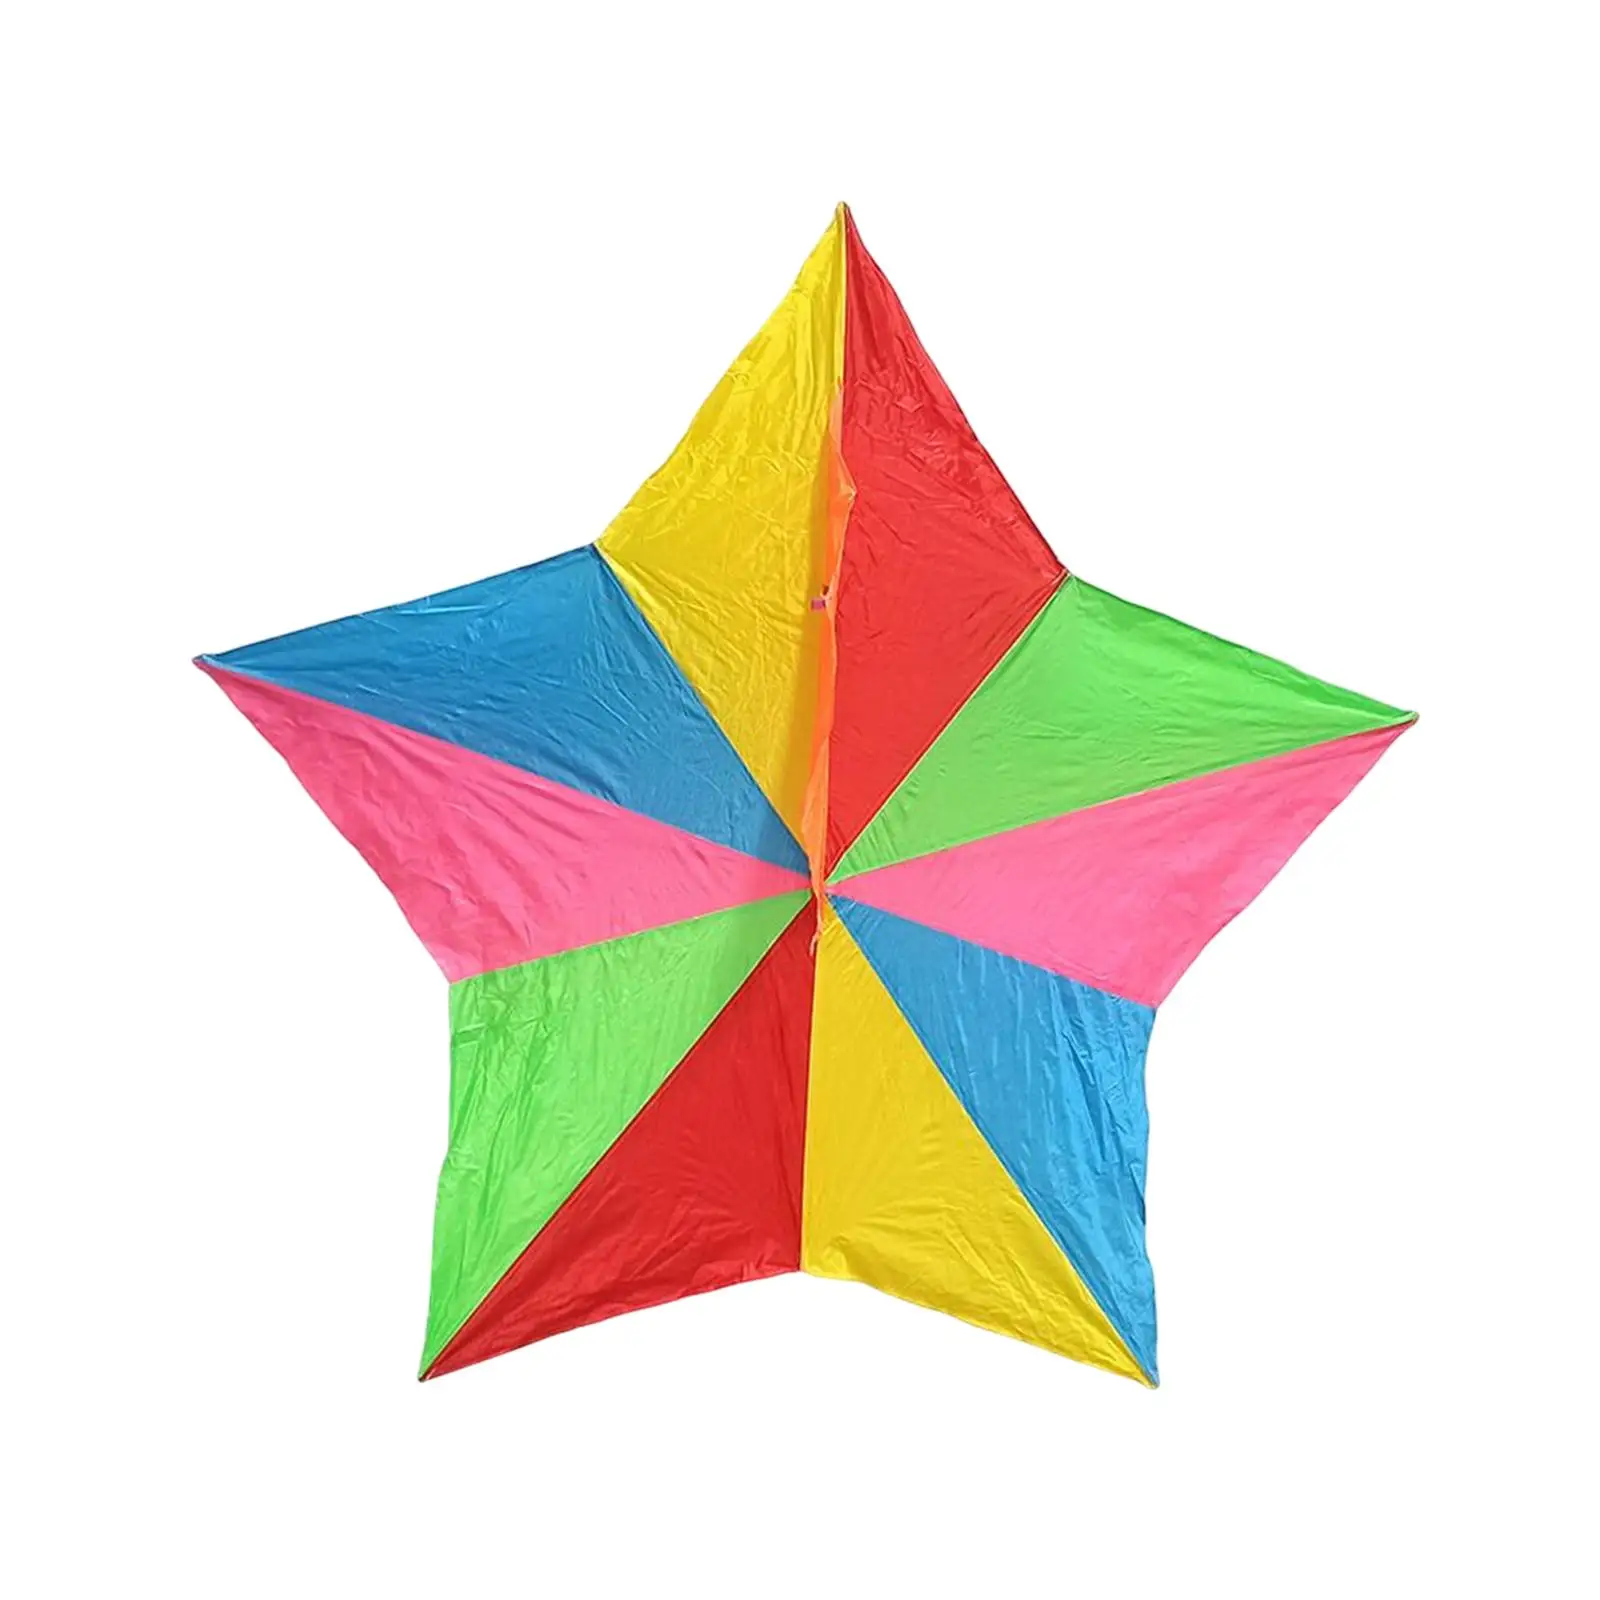 Huge Five Pointed Star Kite Adorable for Beach Outdoor Activities Girls Boys